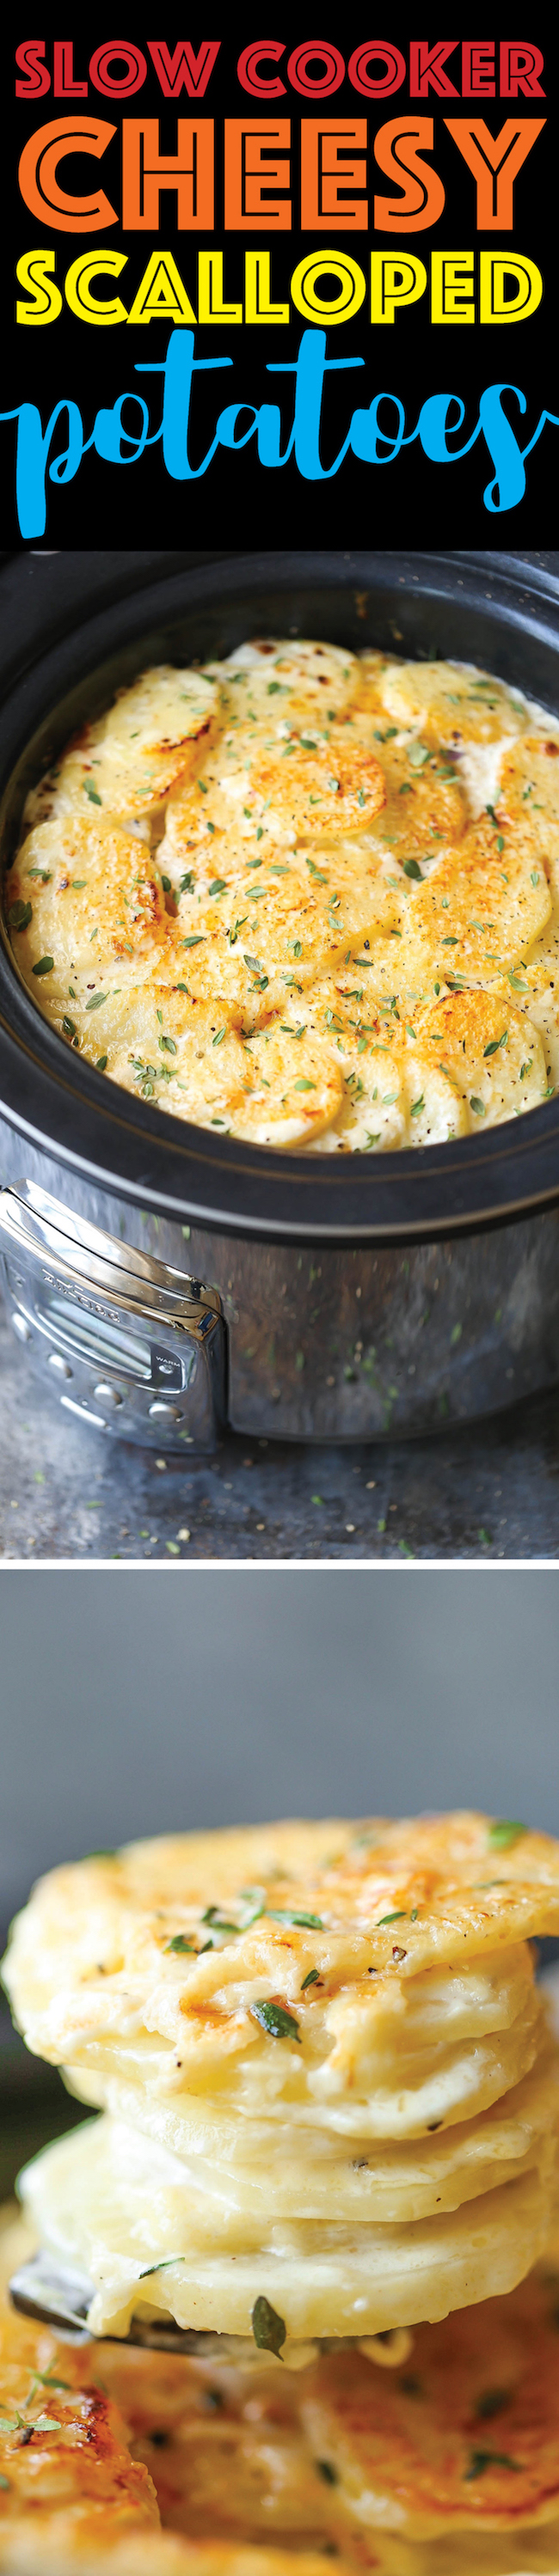 Slow Cooker Cheesy Scalloped Potatoes. This crockpot version of scalloped potatoes is so EASY, creamy, tender and cheesy! And it frees up your oven space! 